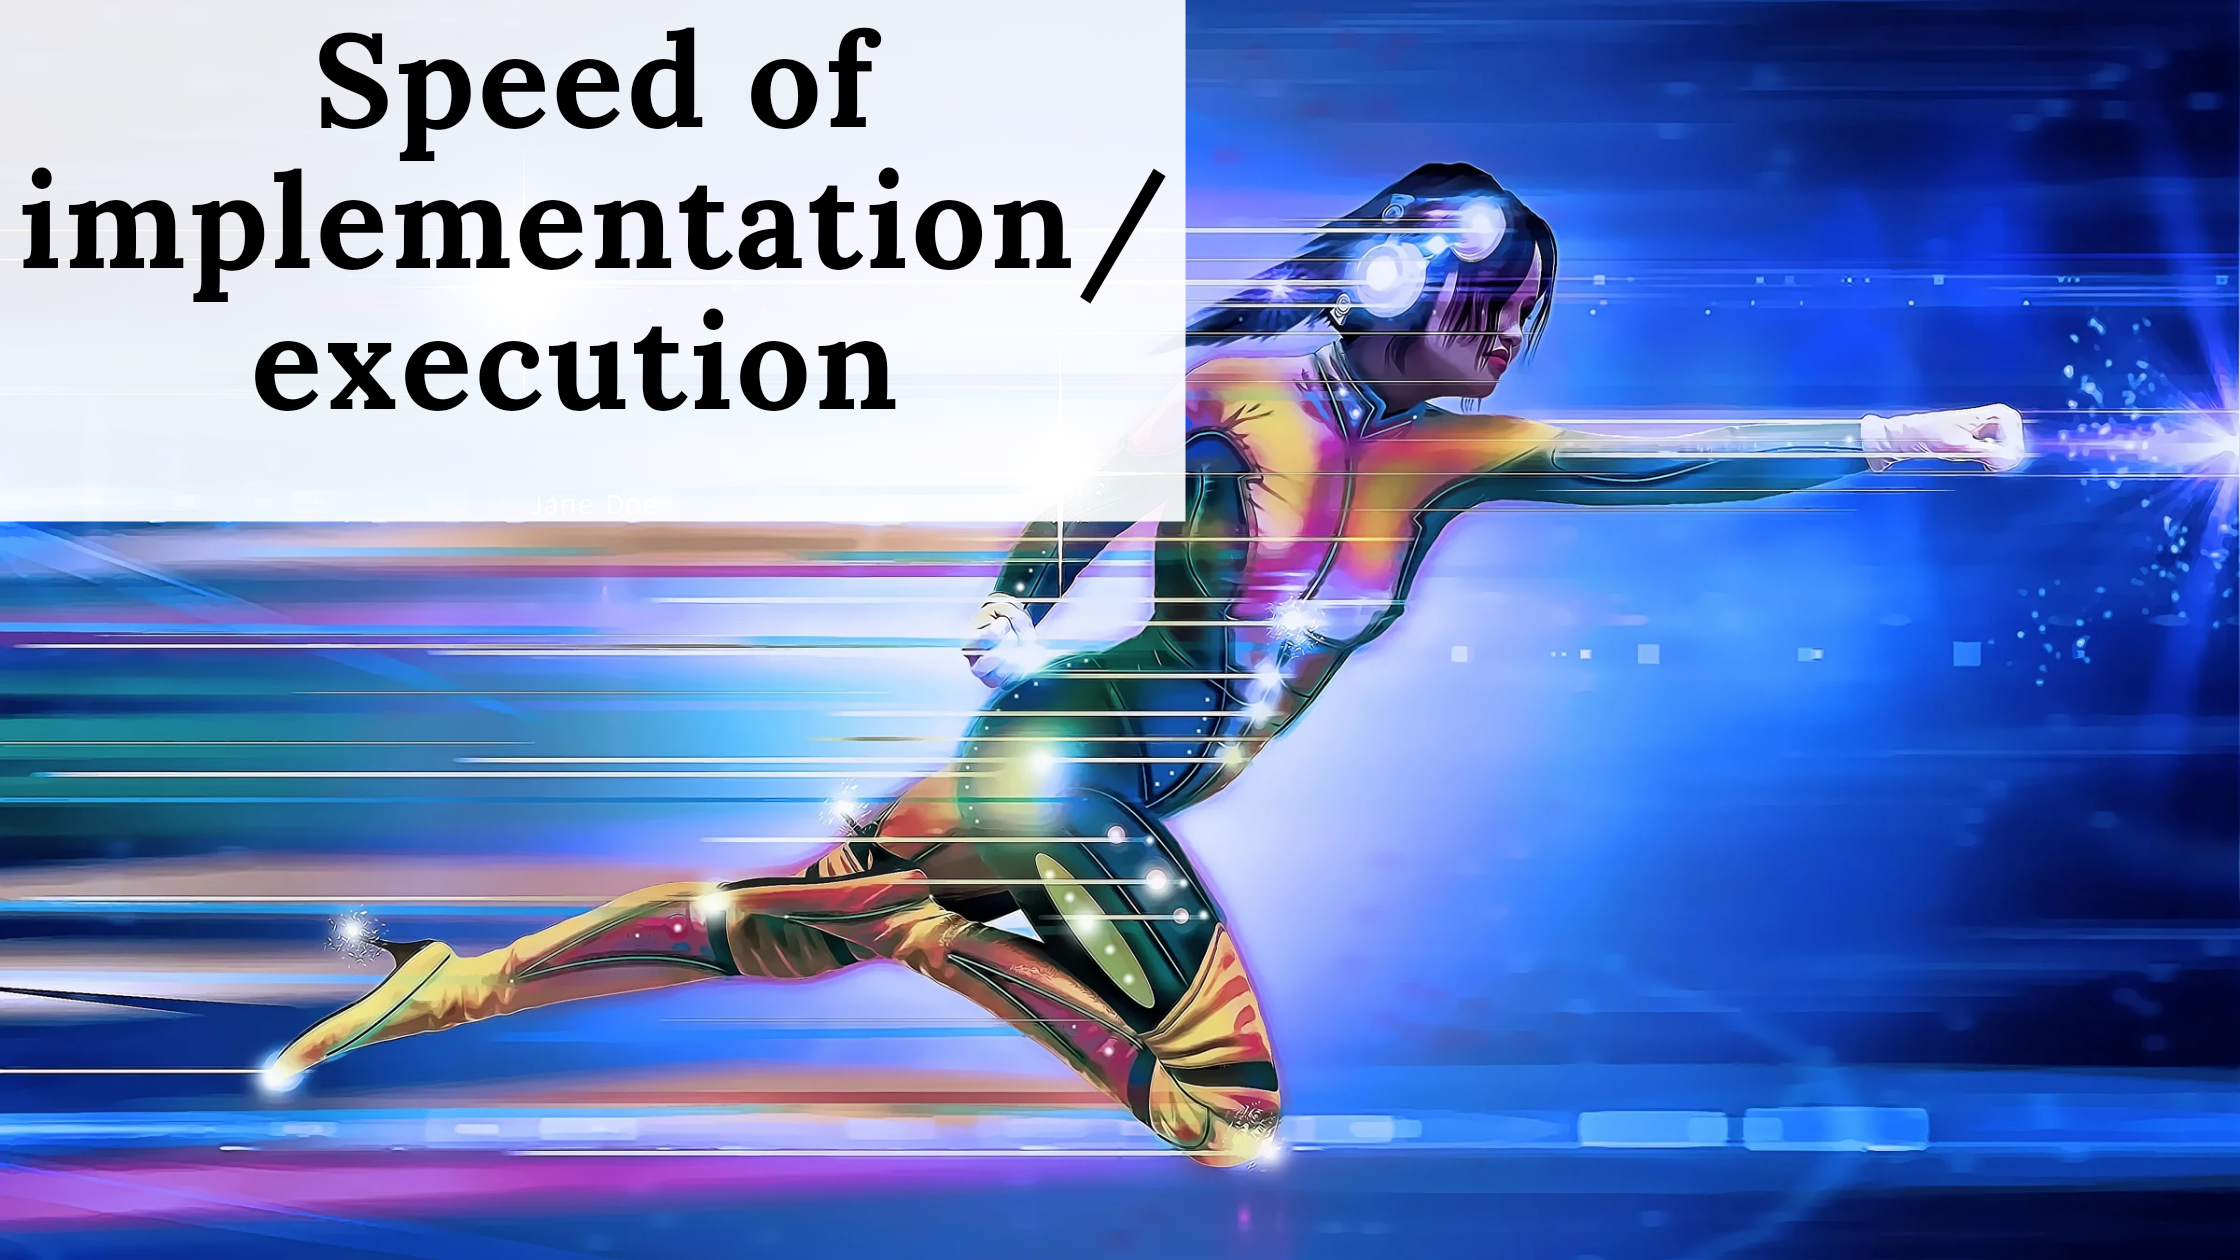 Speed of implementation